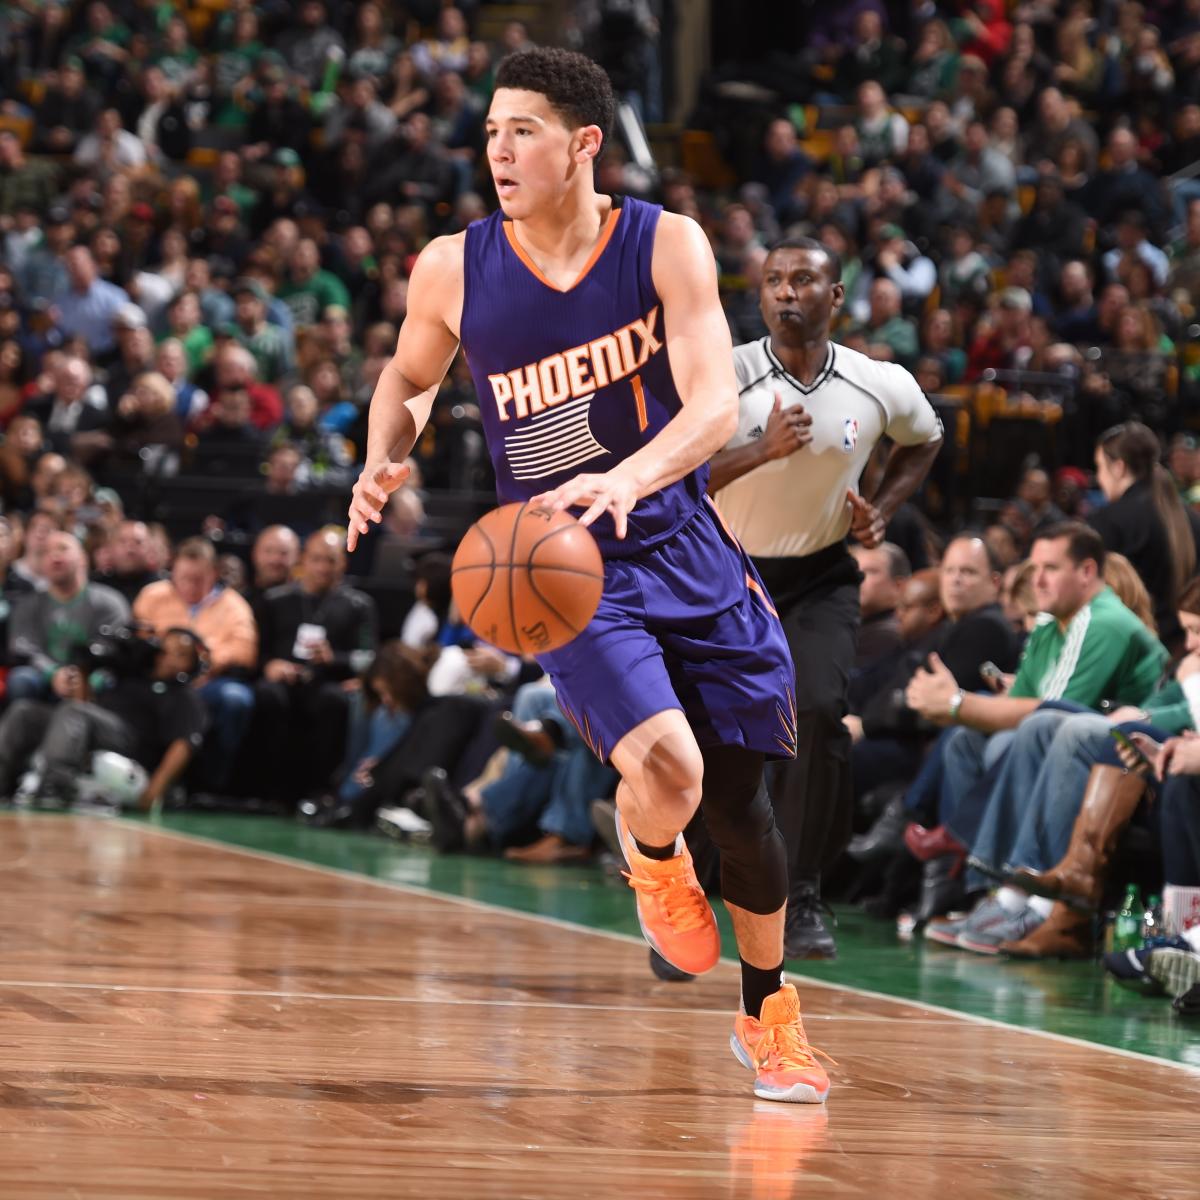 Devin Booker Sets Suns Rookie Record with 6 3-Pointers Made | News ...